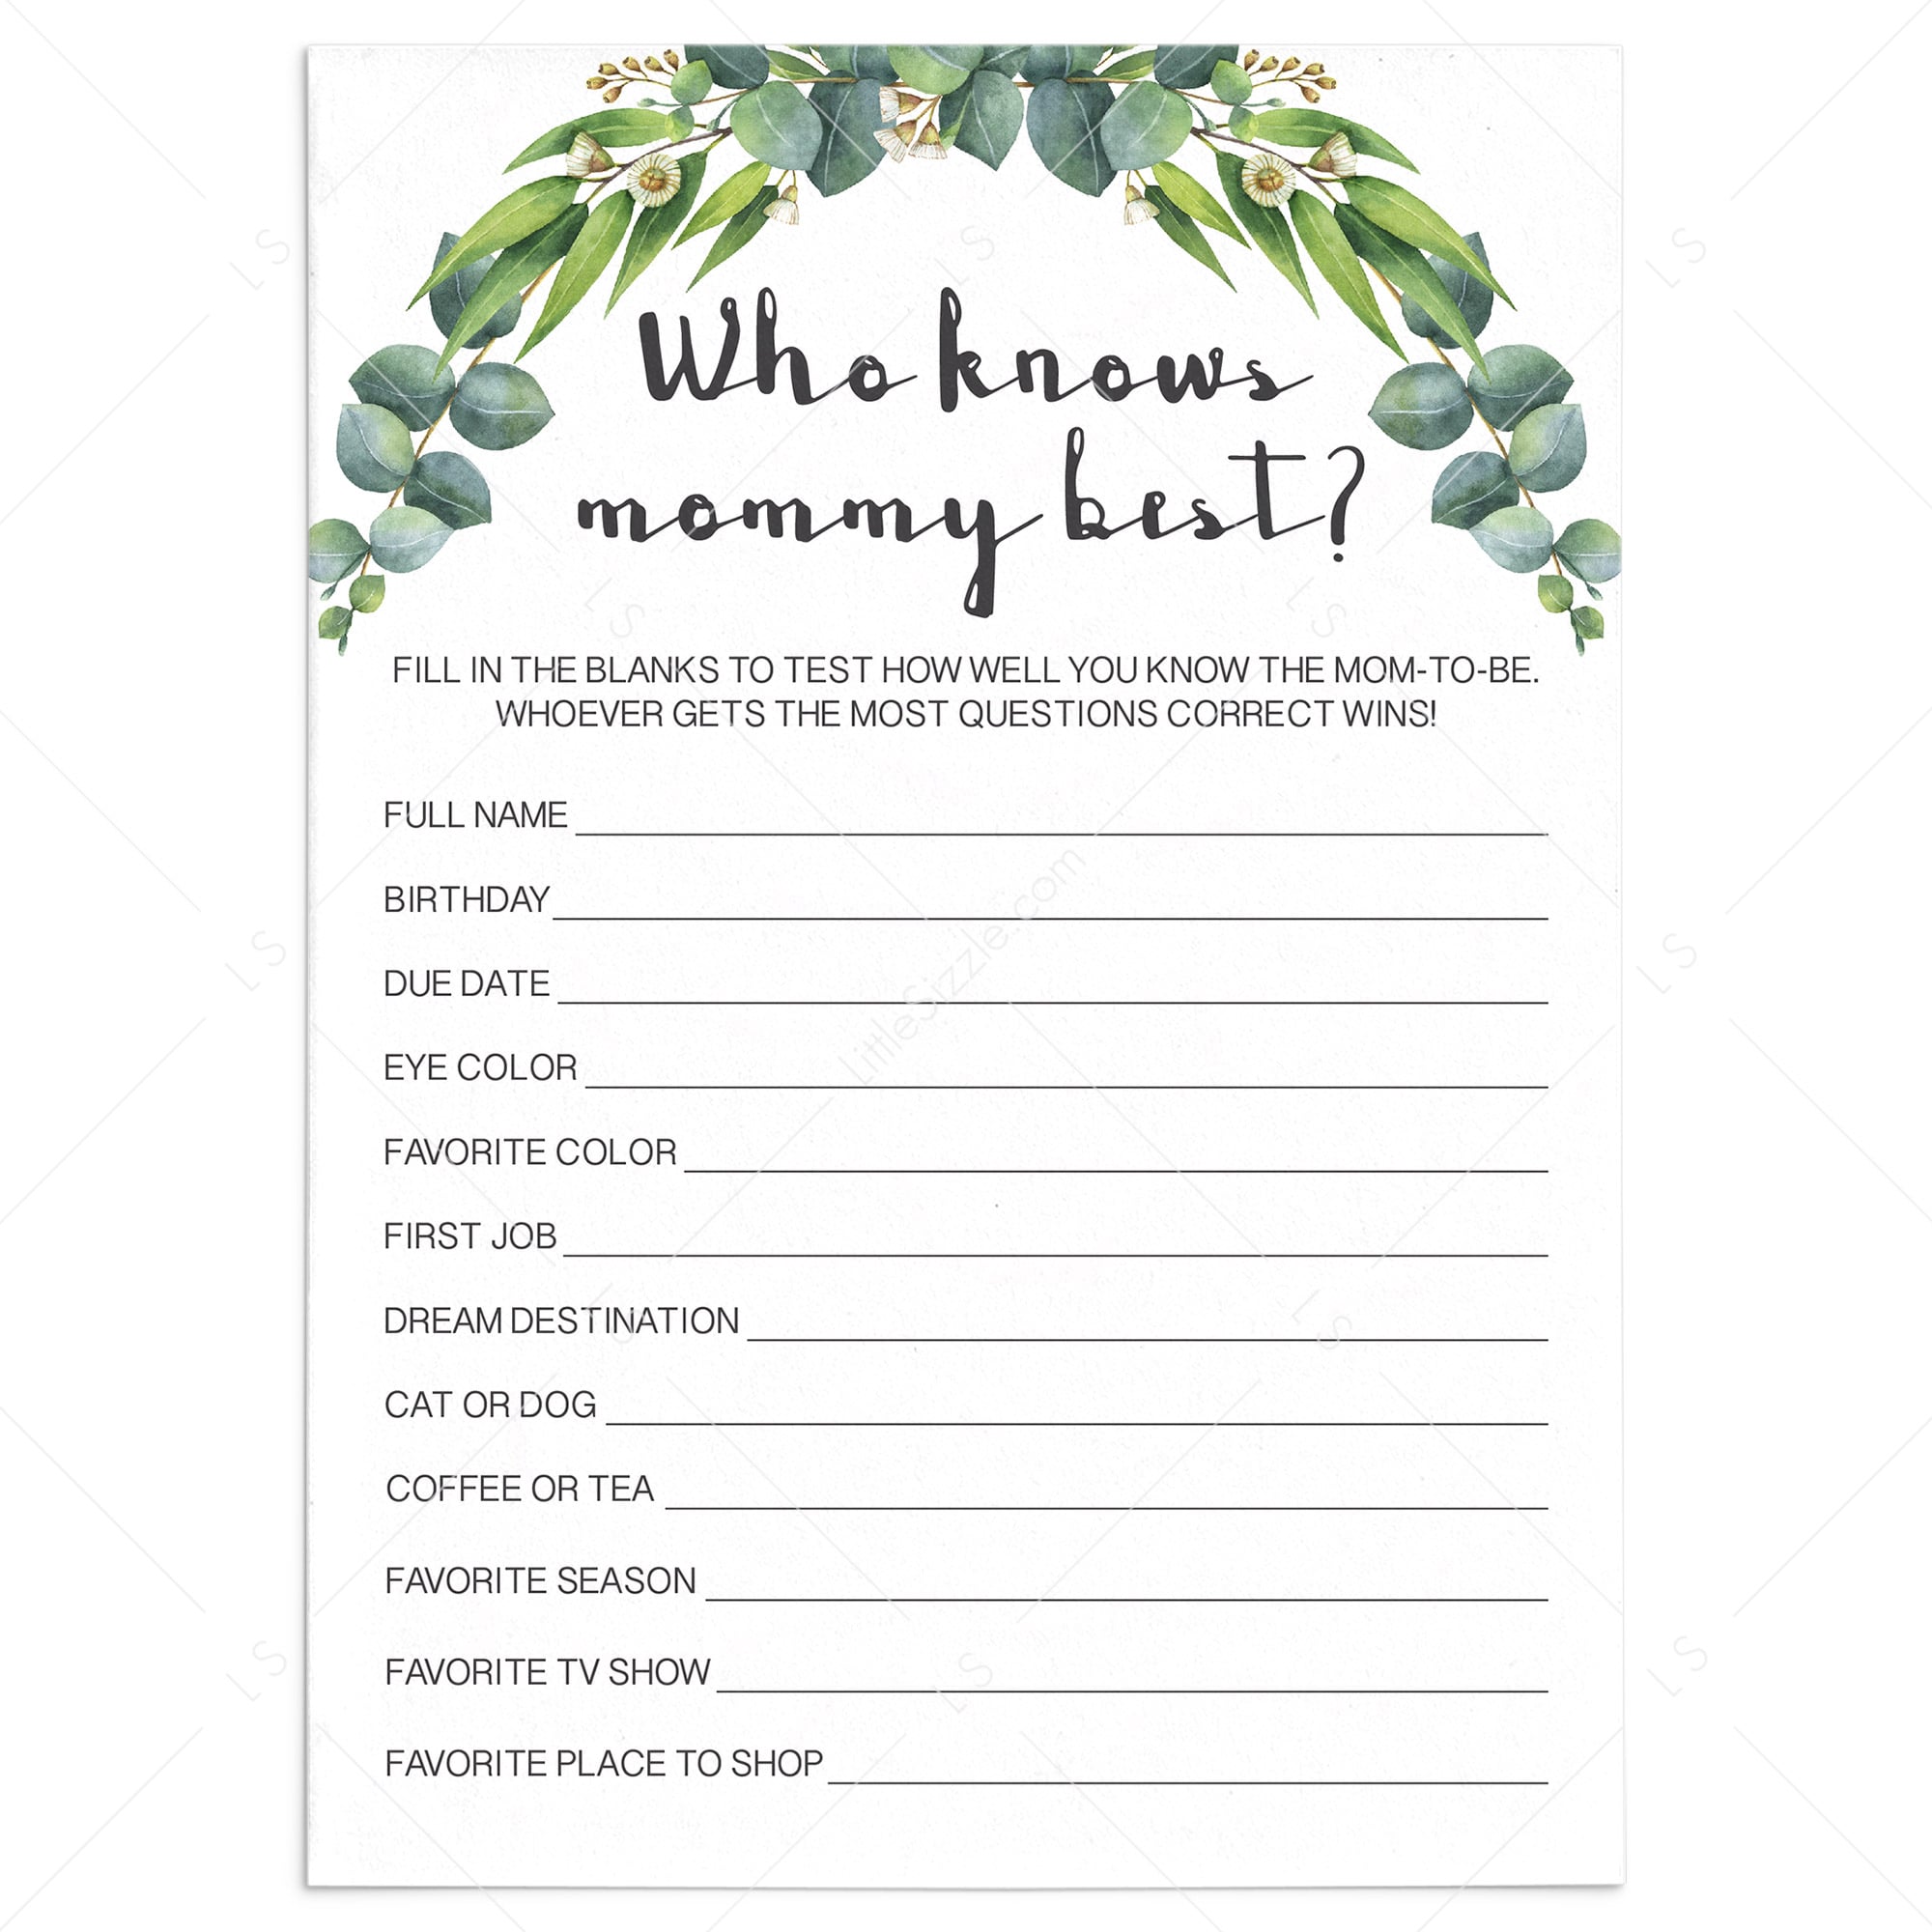 Gender neutral baby shower game who knows mommy best by LittleSizzle